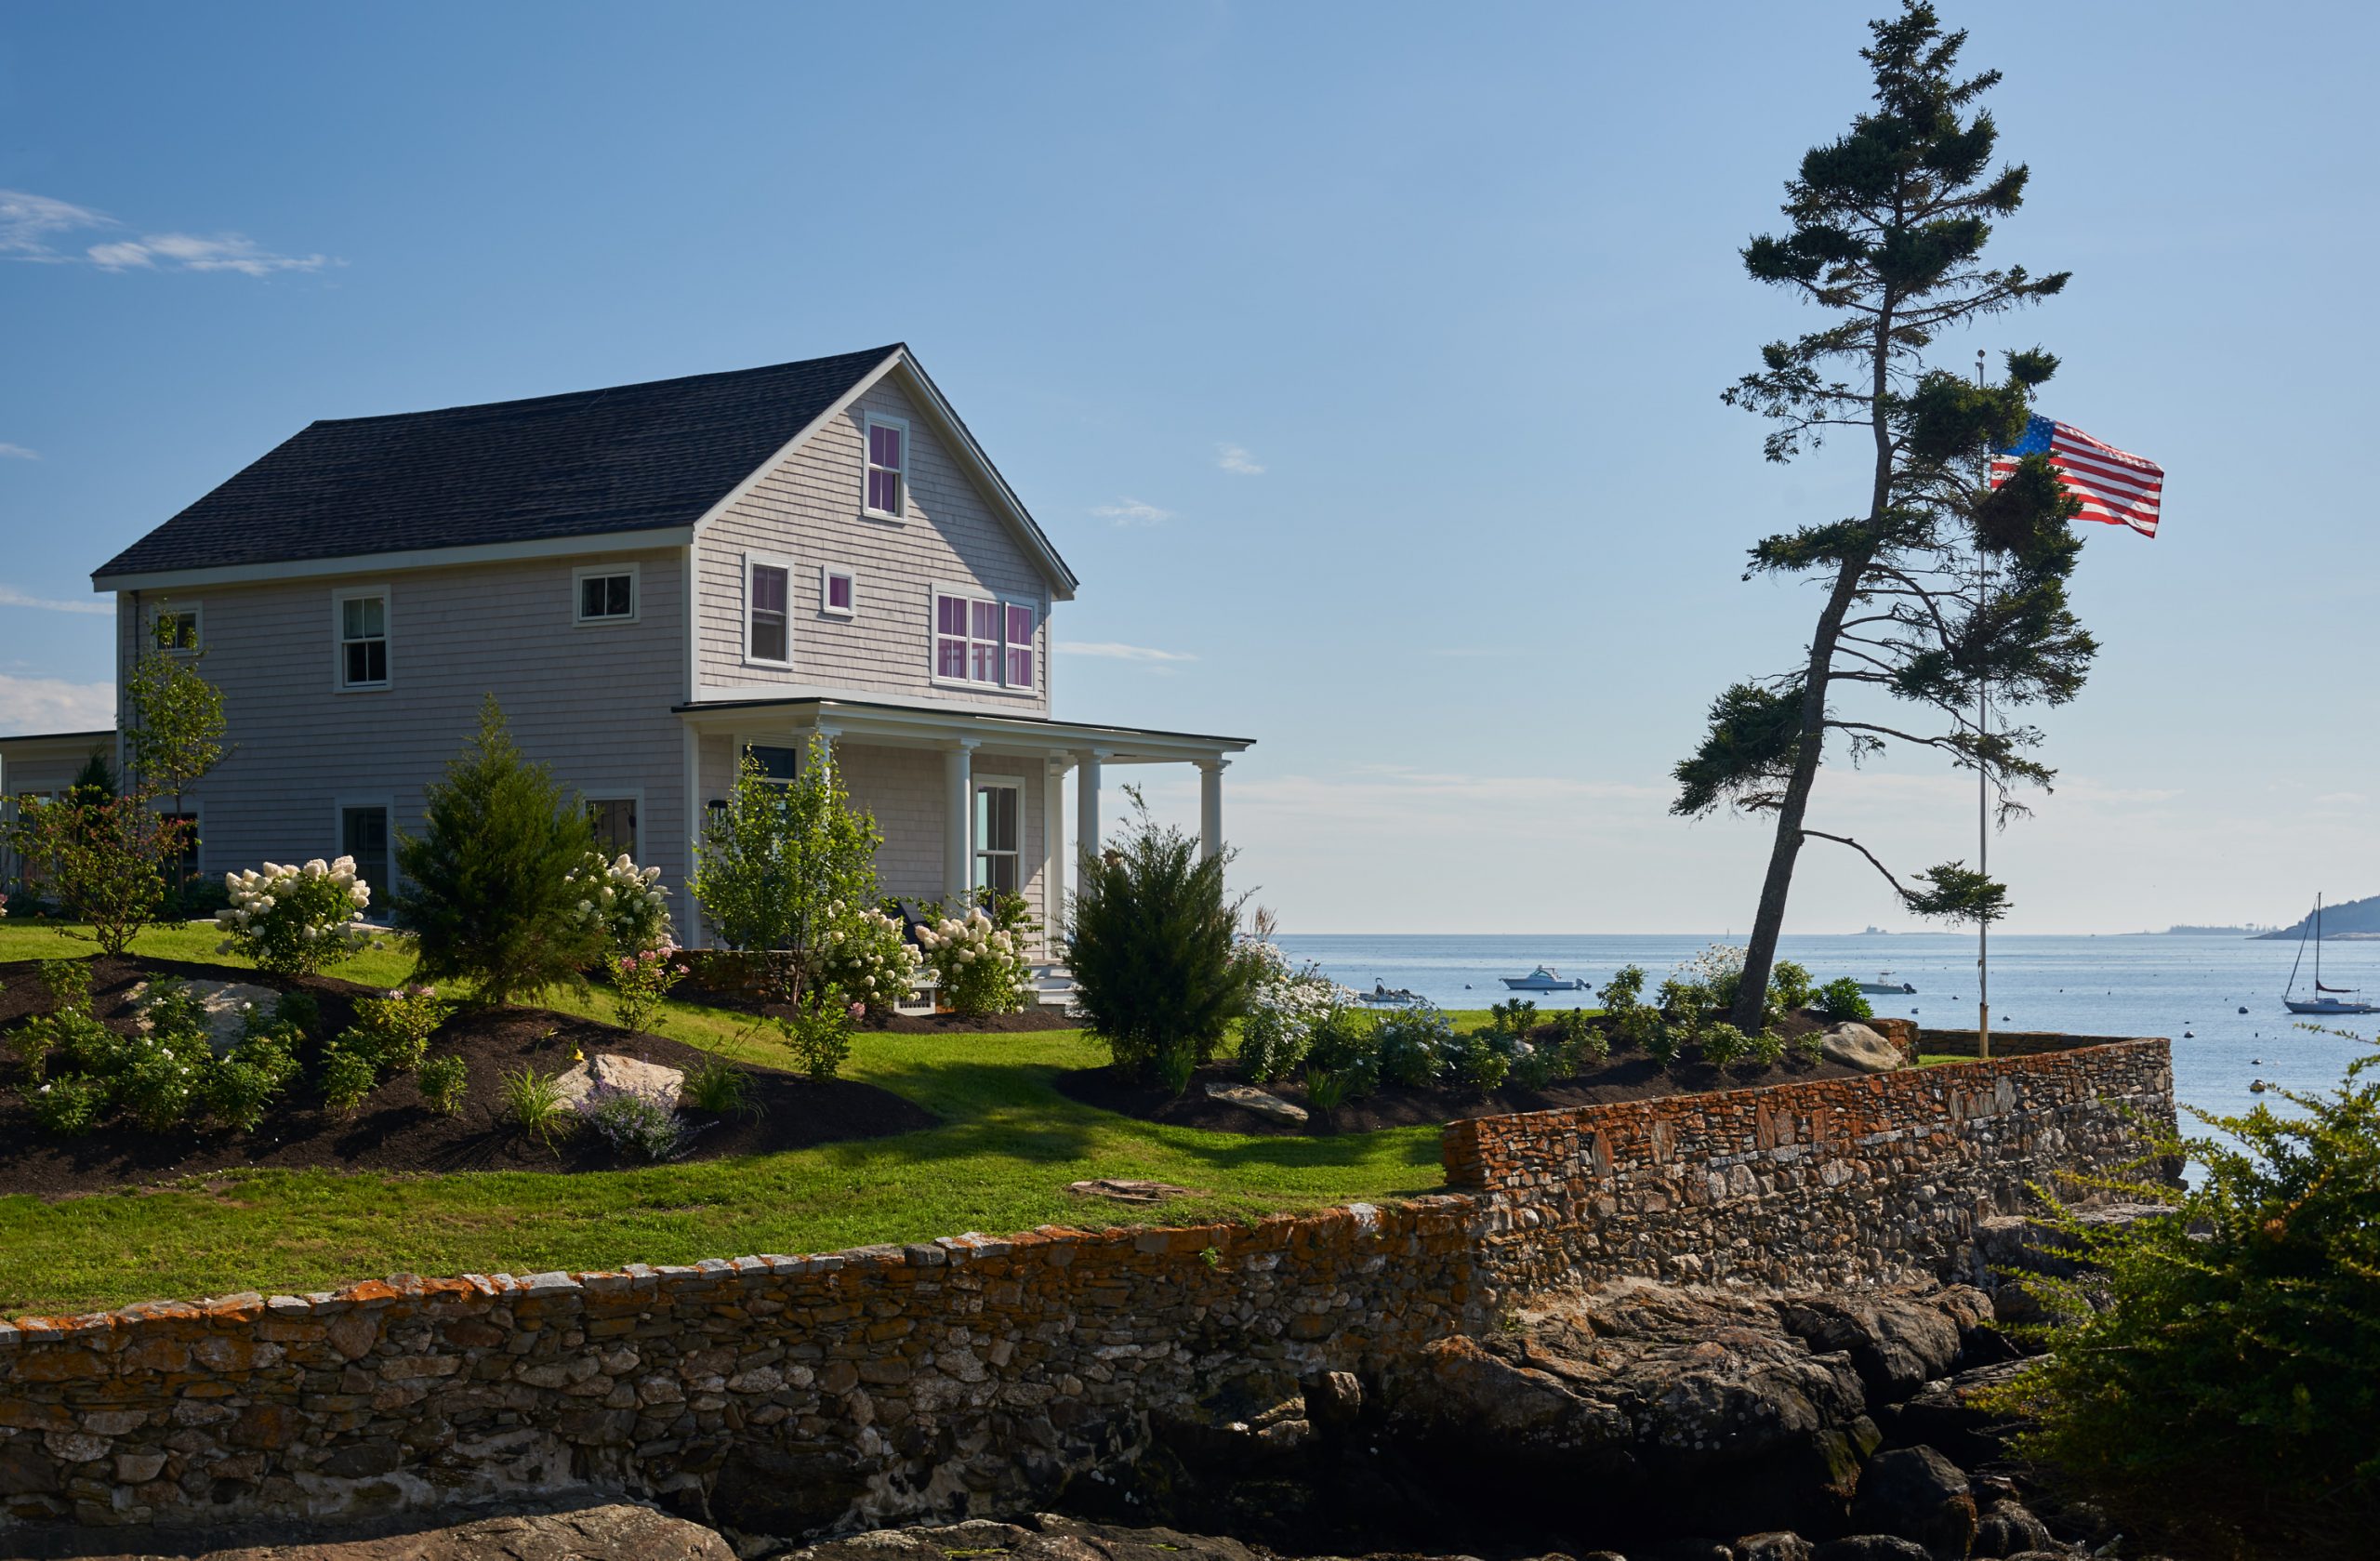 A stunning Twin Cove home with spacious lawn, wood side detailing, a flagpole, and a stone wall that wraps along the coastline.